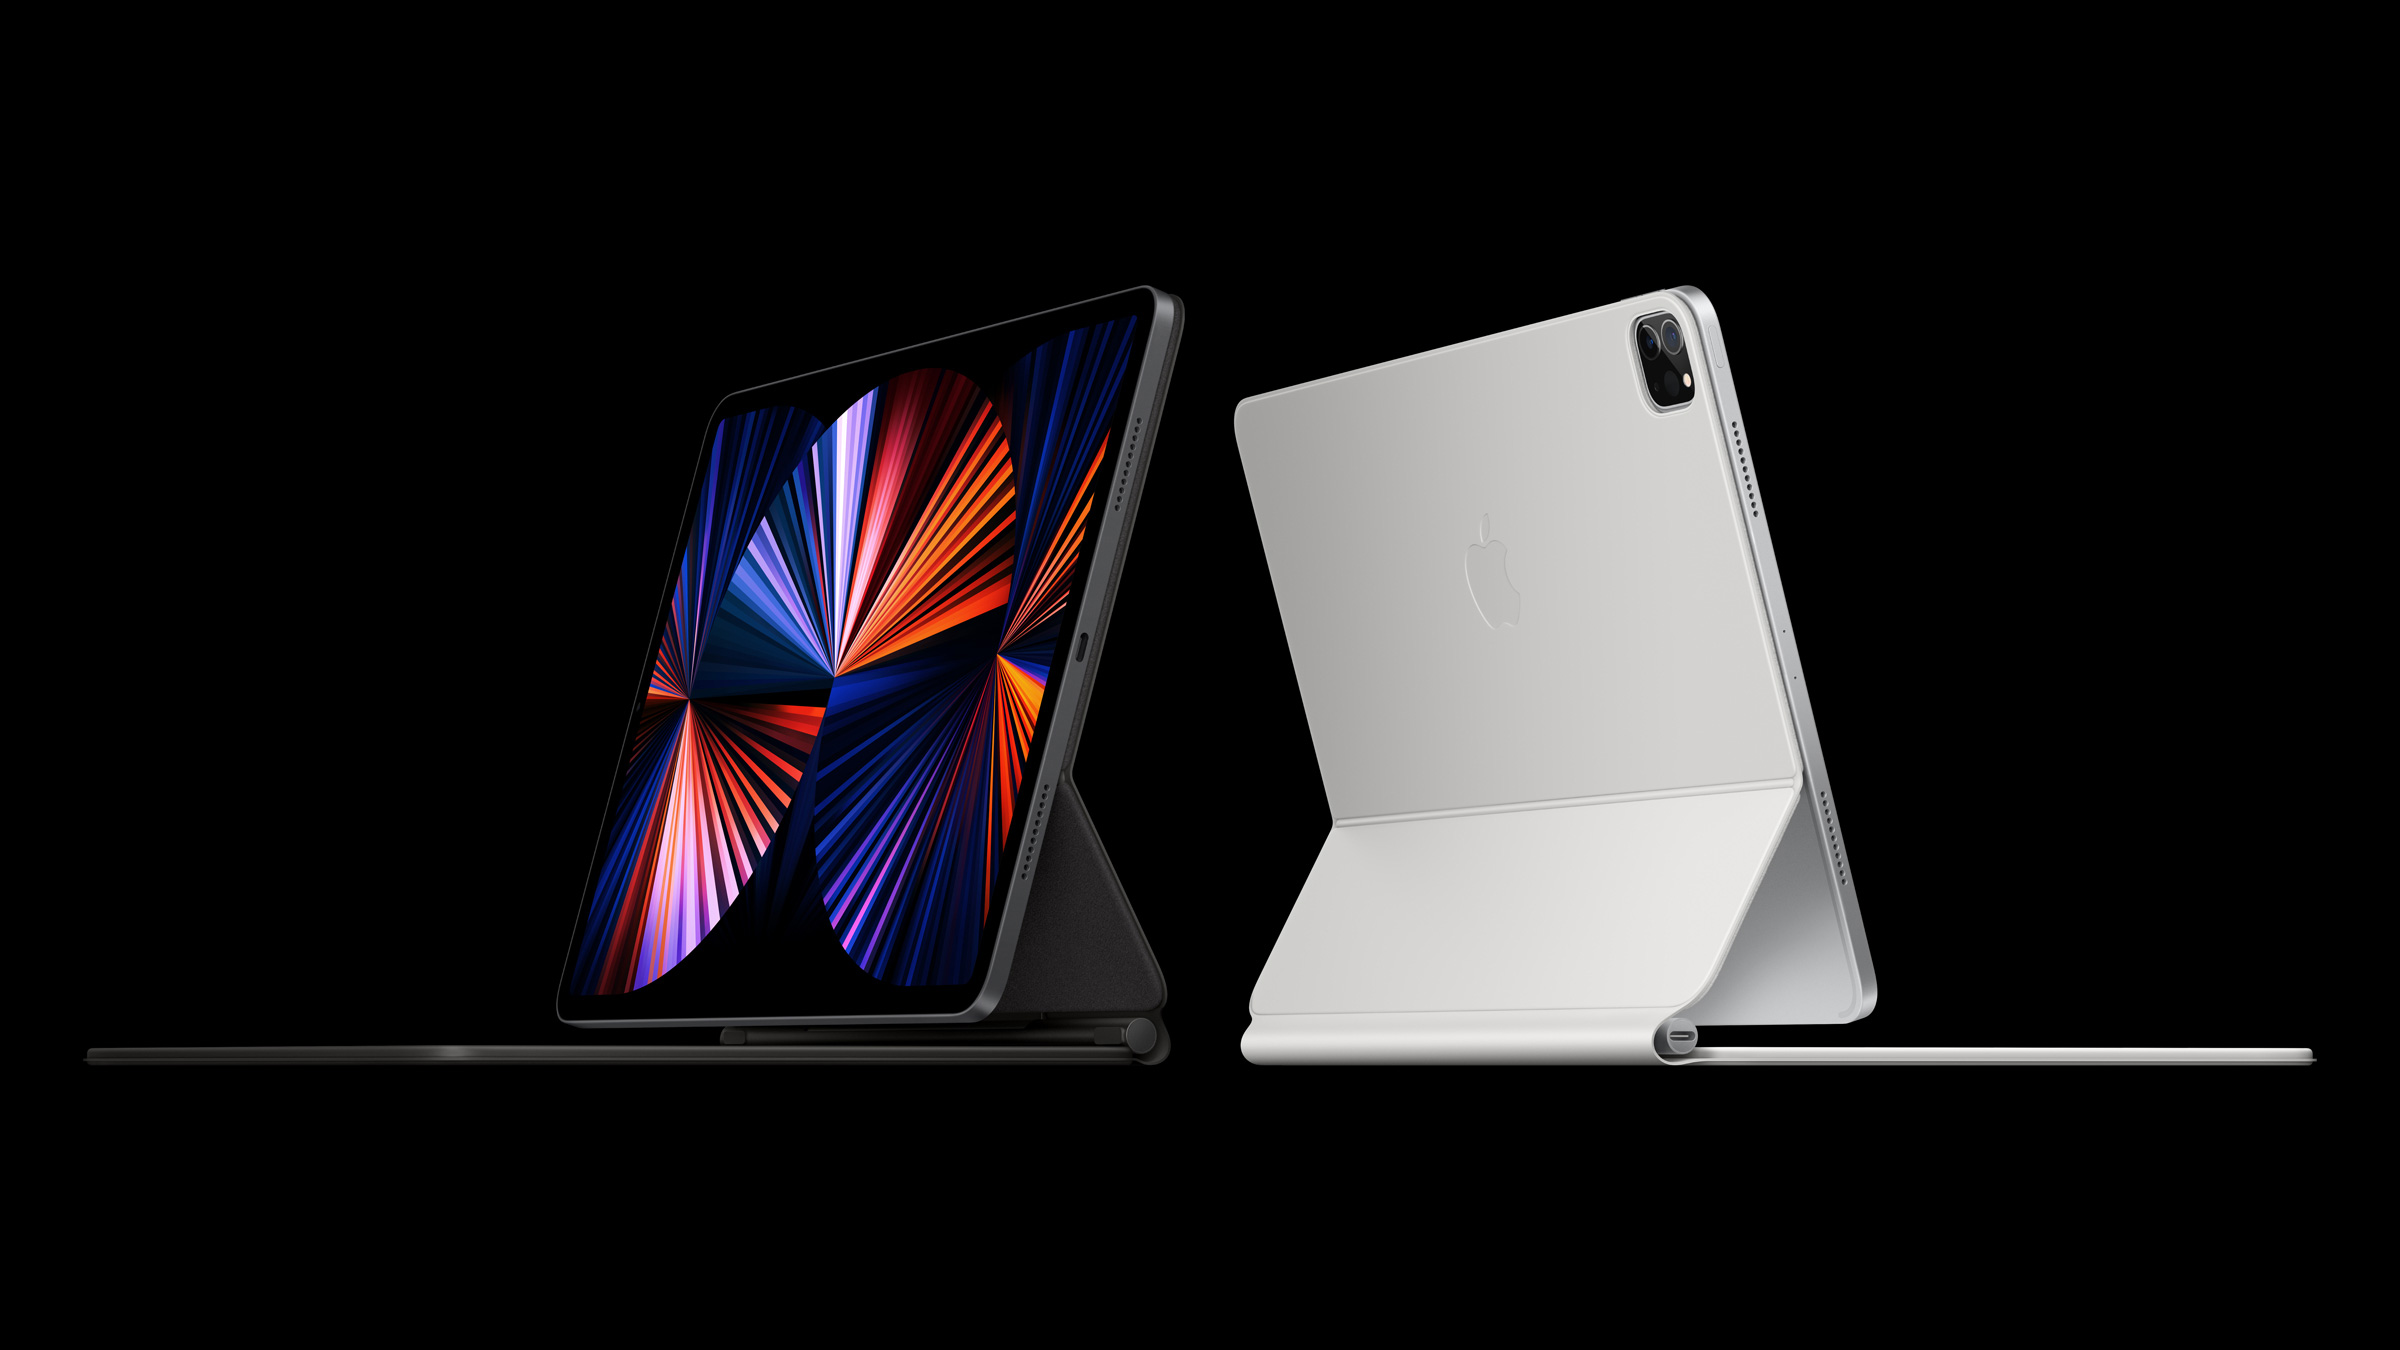 New iPad Pros Announced with the M1 Chipset, Thunderbolt, 5G, New